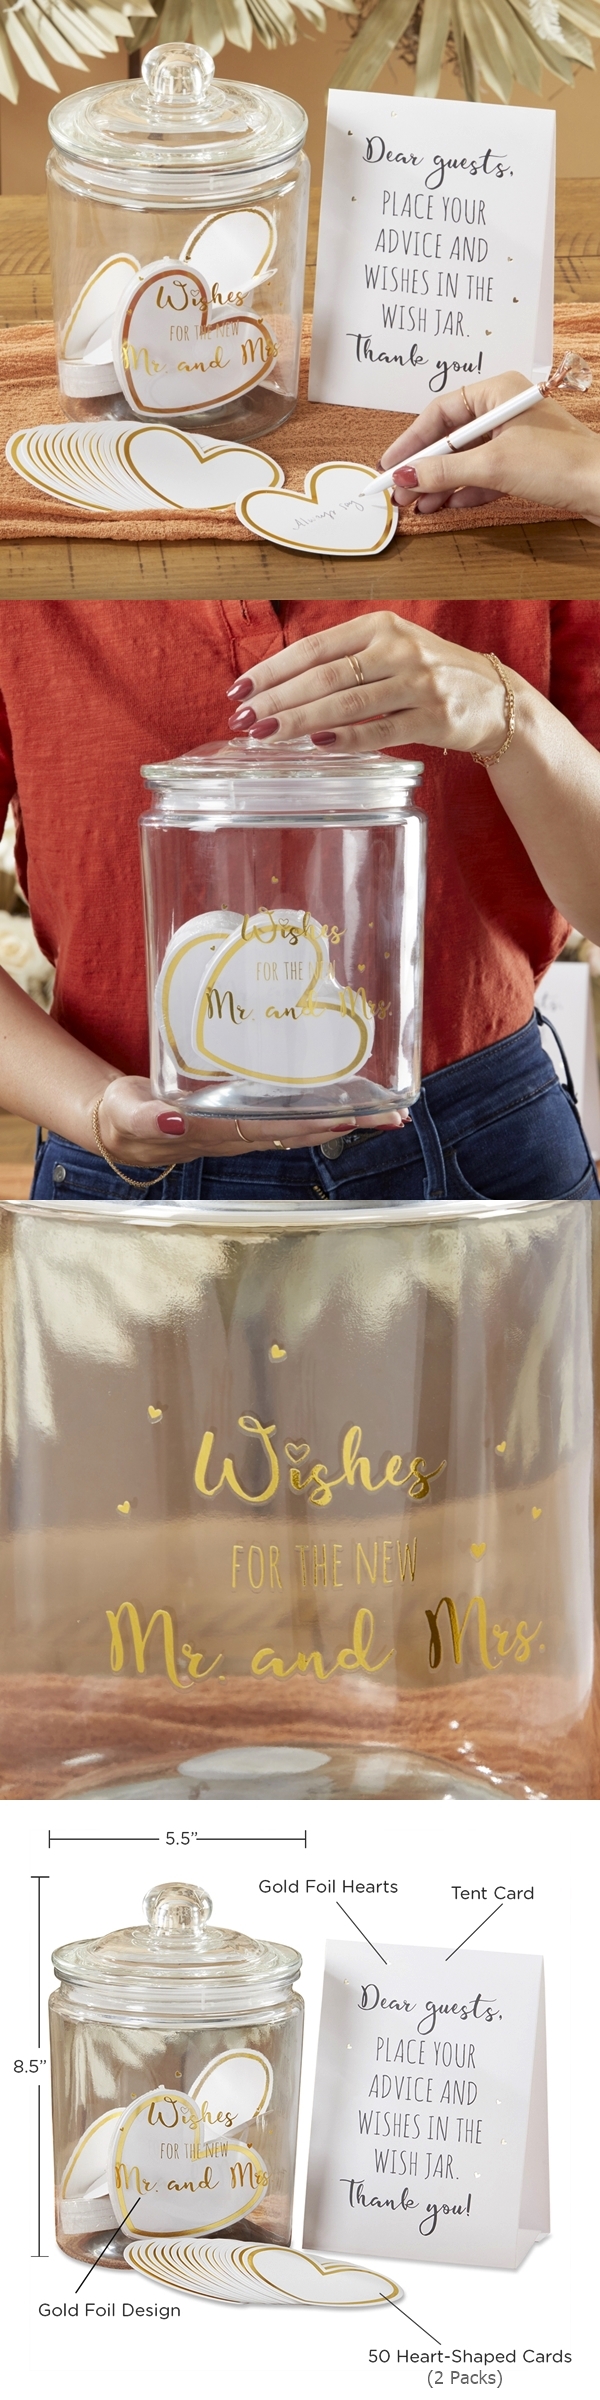 Kate Aspen Wedding Wish Glass Jar with Heart-Shaped Well-Wishes Cards